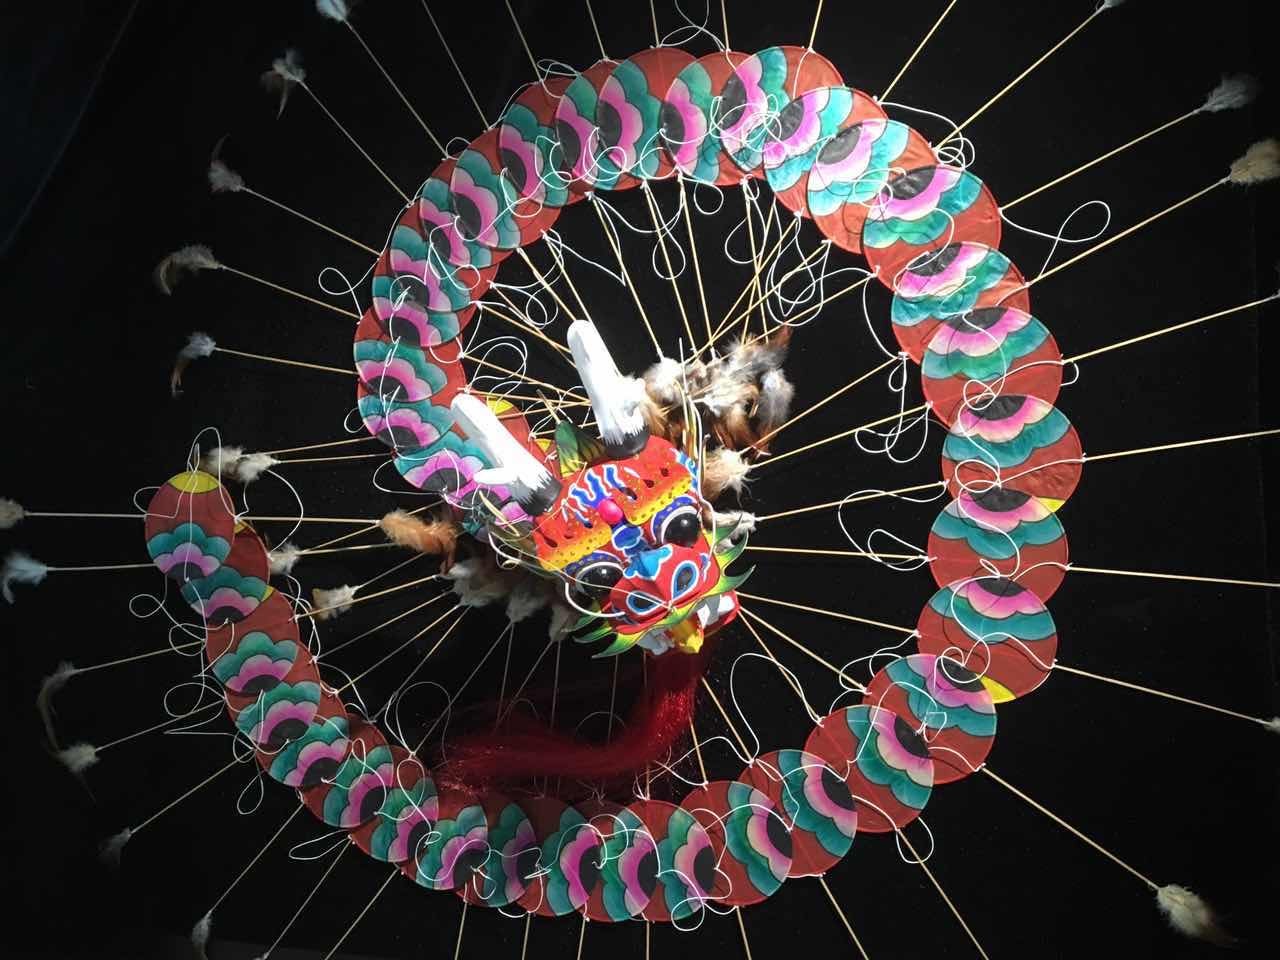 A dragon-headed centipede kite made by Yang Hongwei, a national-level representative inheritor of kite-making techniques in Weifang, Shandong province